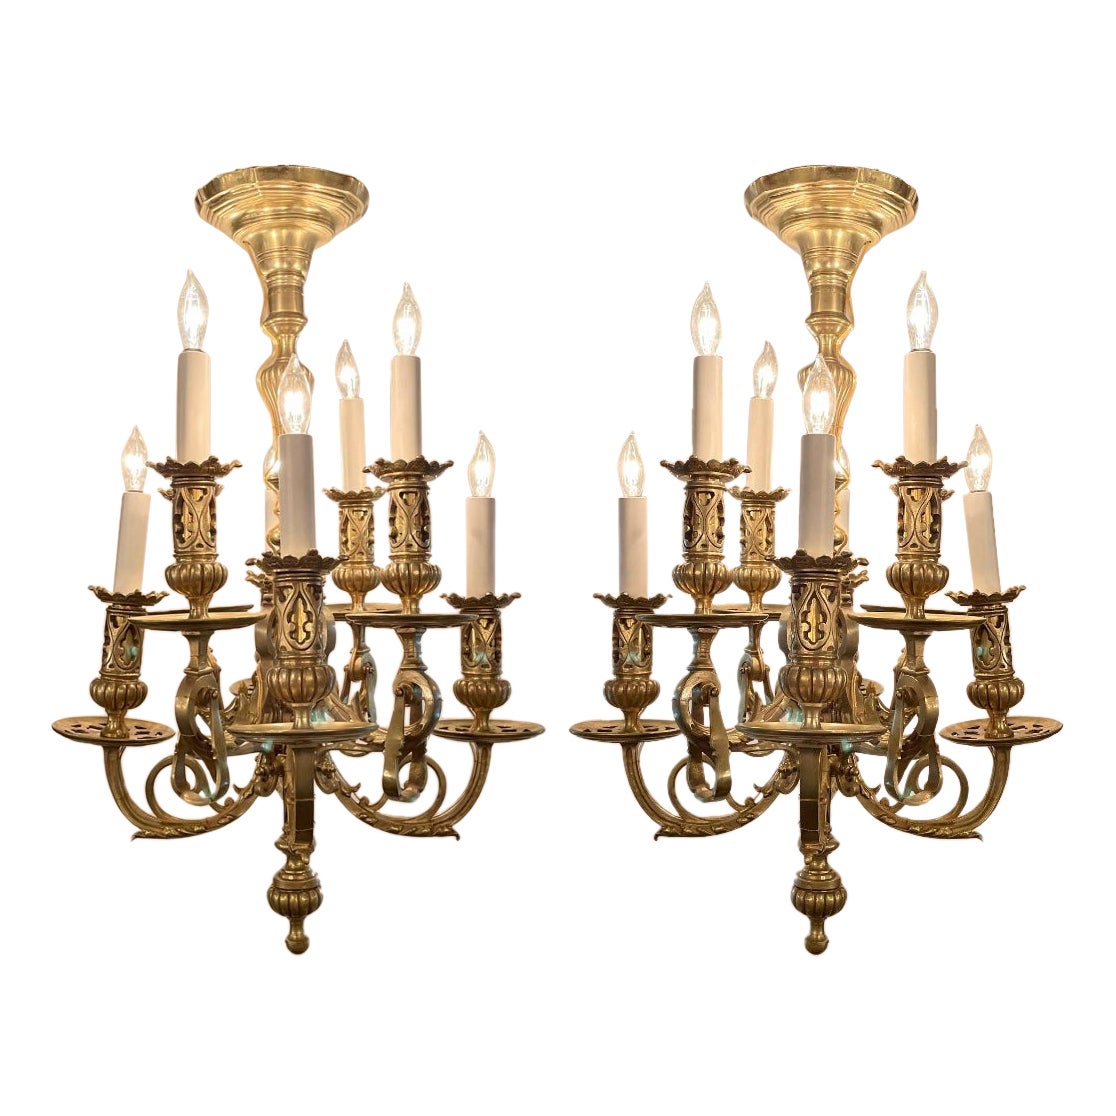 Pair Antique French Louis XIII Style Gold Bronze Chandeliers circa 1860-1870